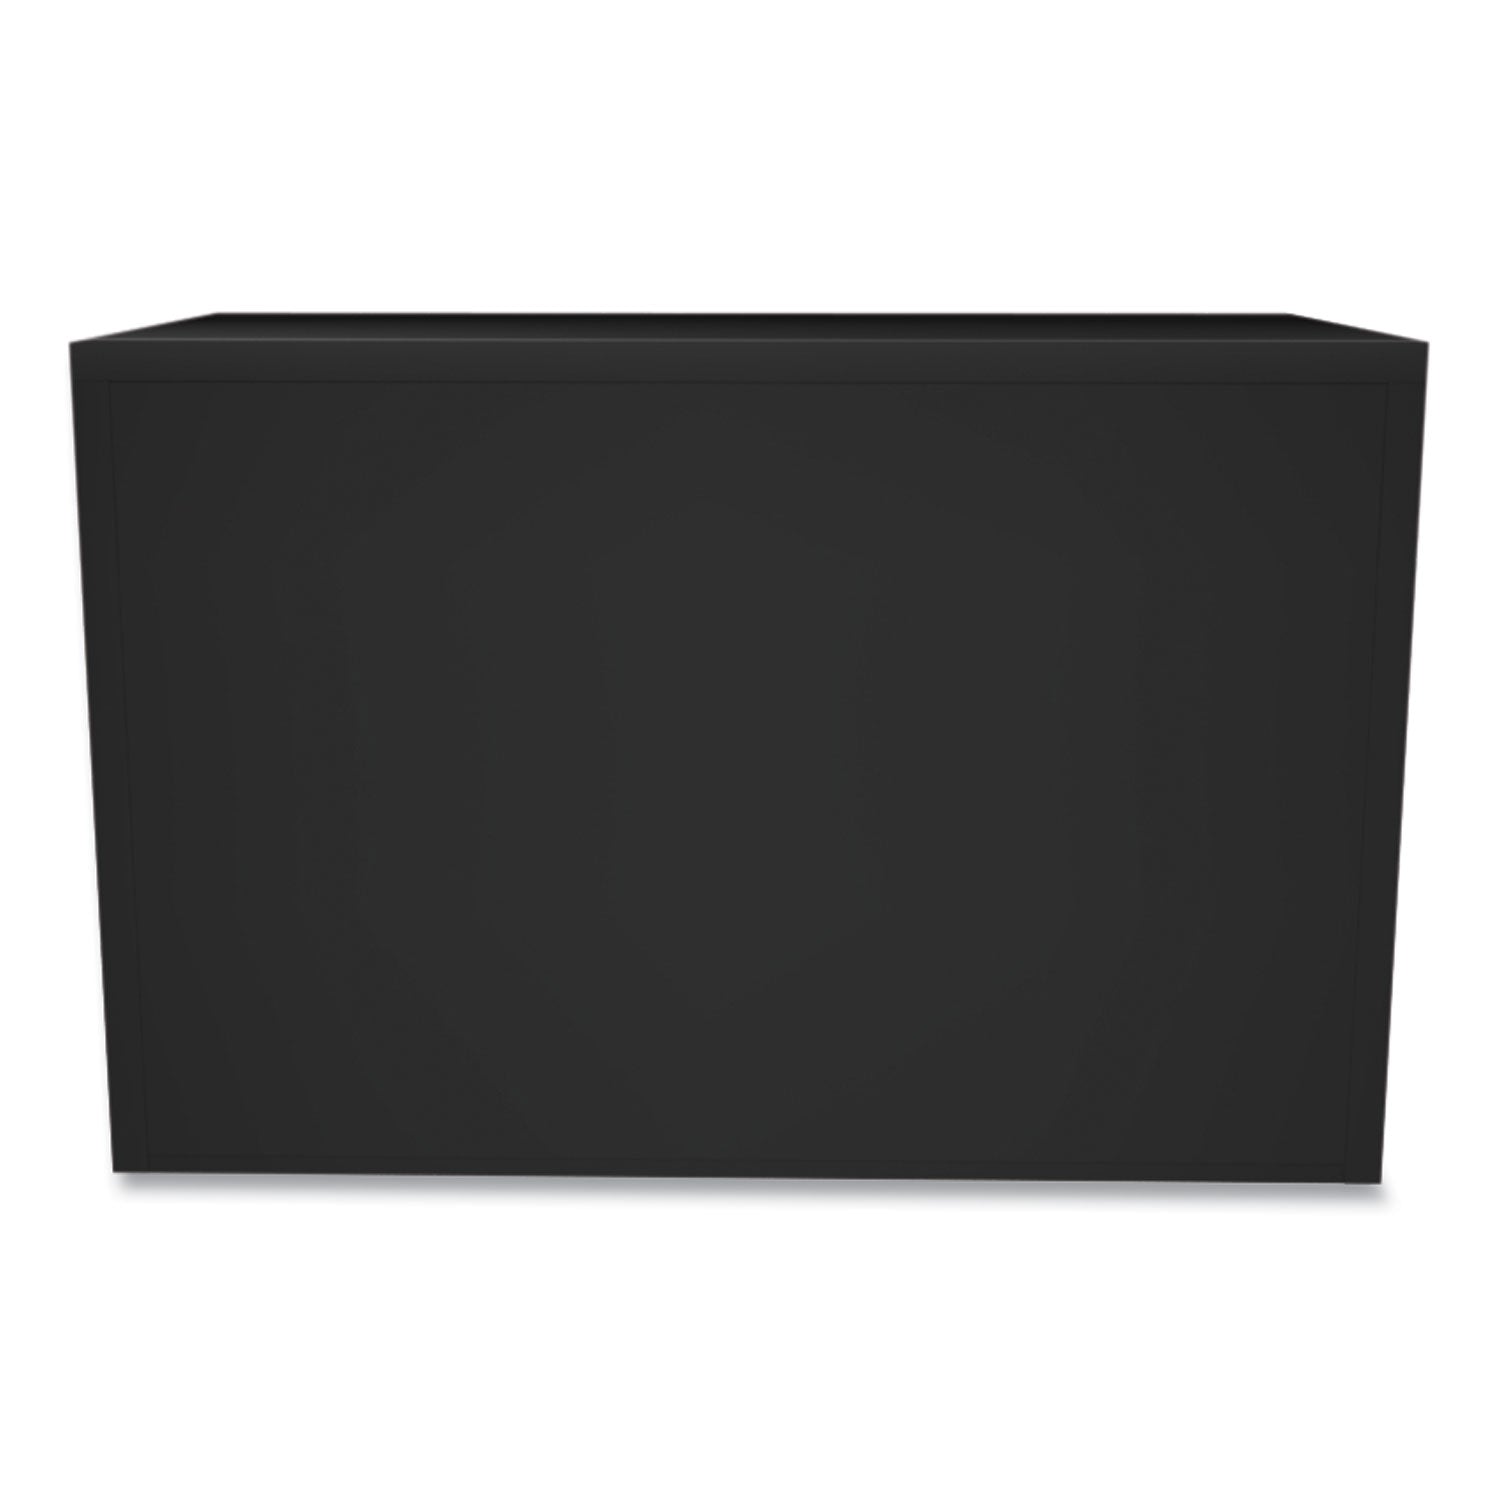 Brigade 700 Series Lateral File, 2 Legal/Letter-Size File Drawers, Black, 42" x 18" x 28 - 